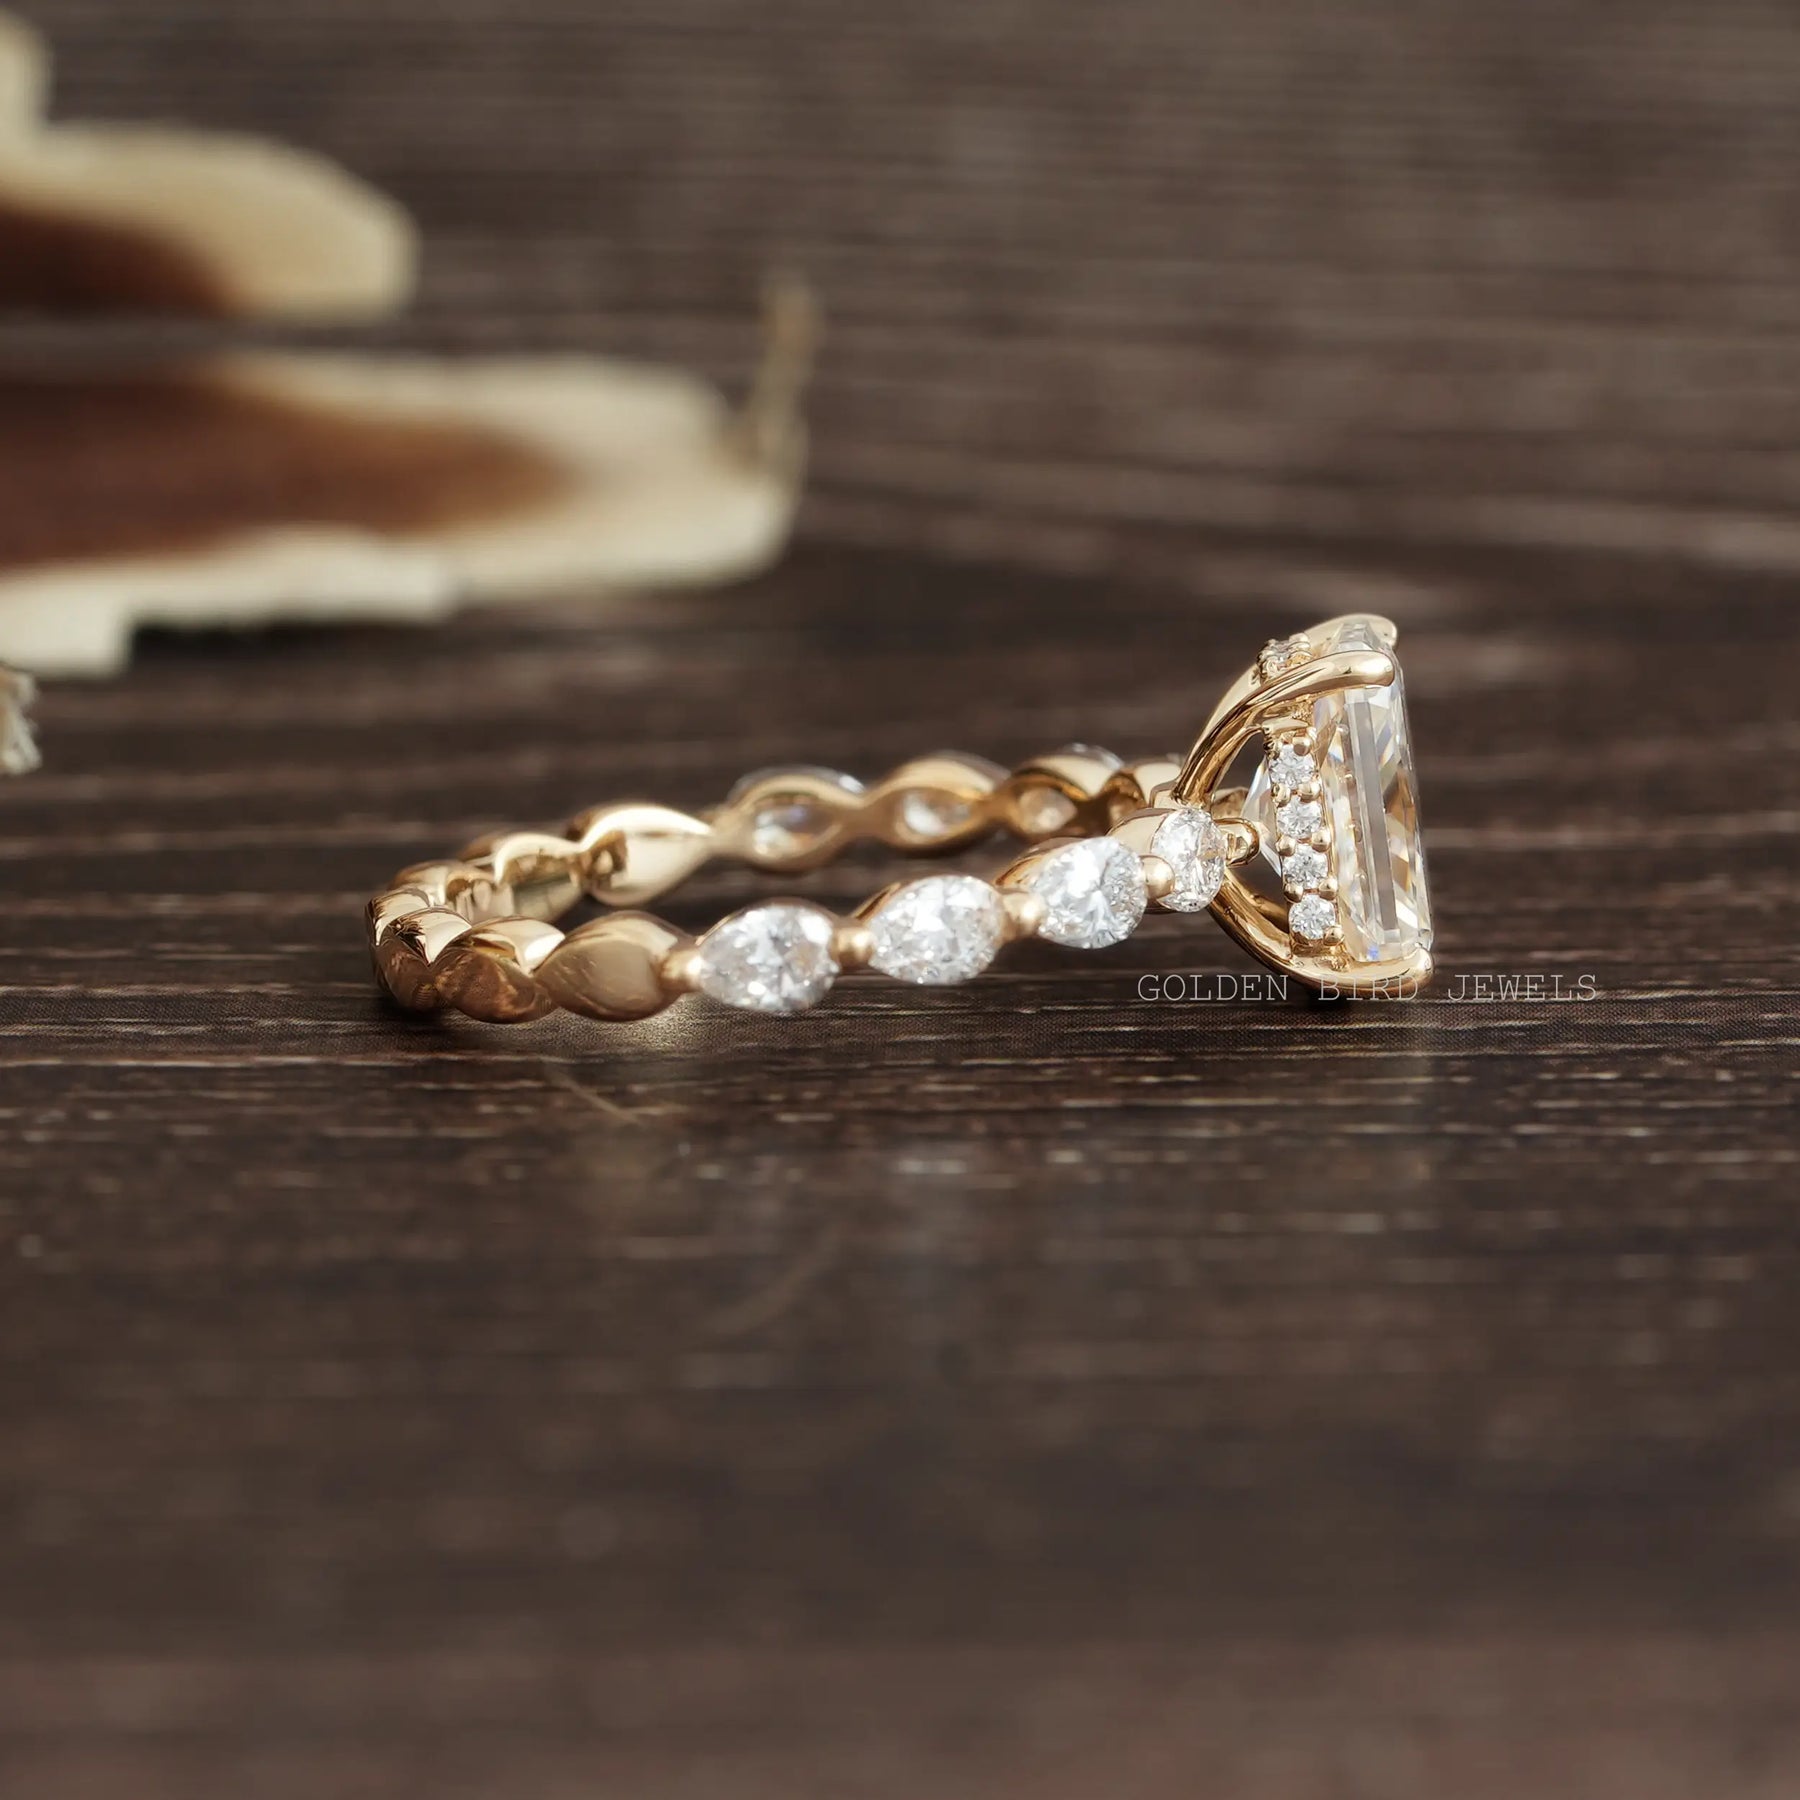  [Radiant & Pear Shaped Moissanite Ring In 18k Yellow Gold]-[Golden Bird Jewels]